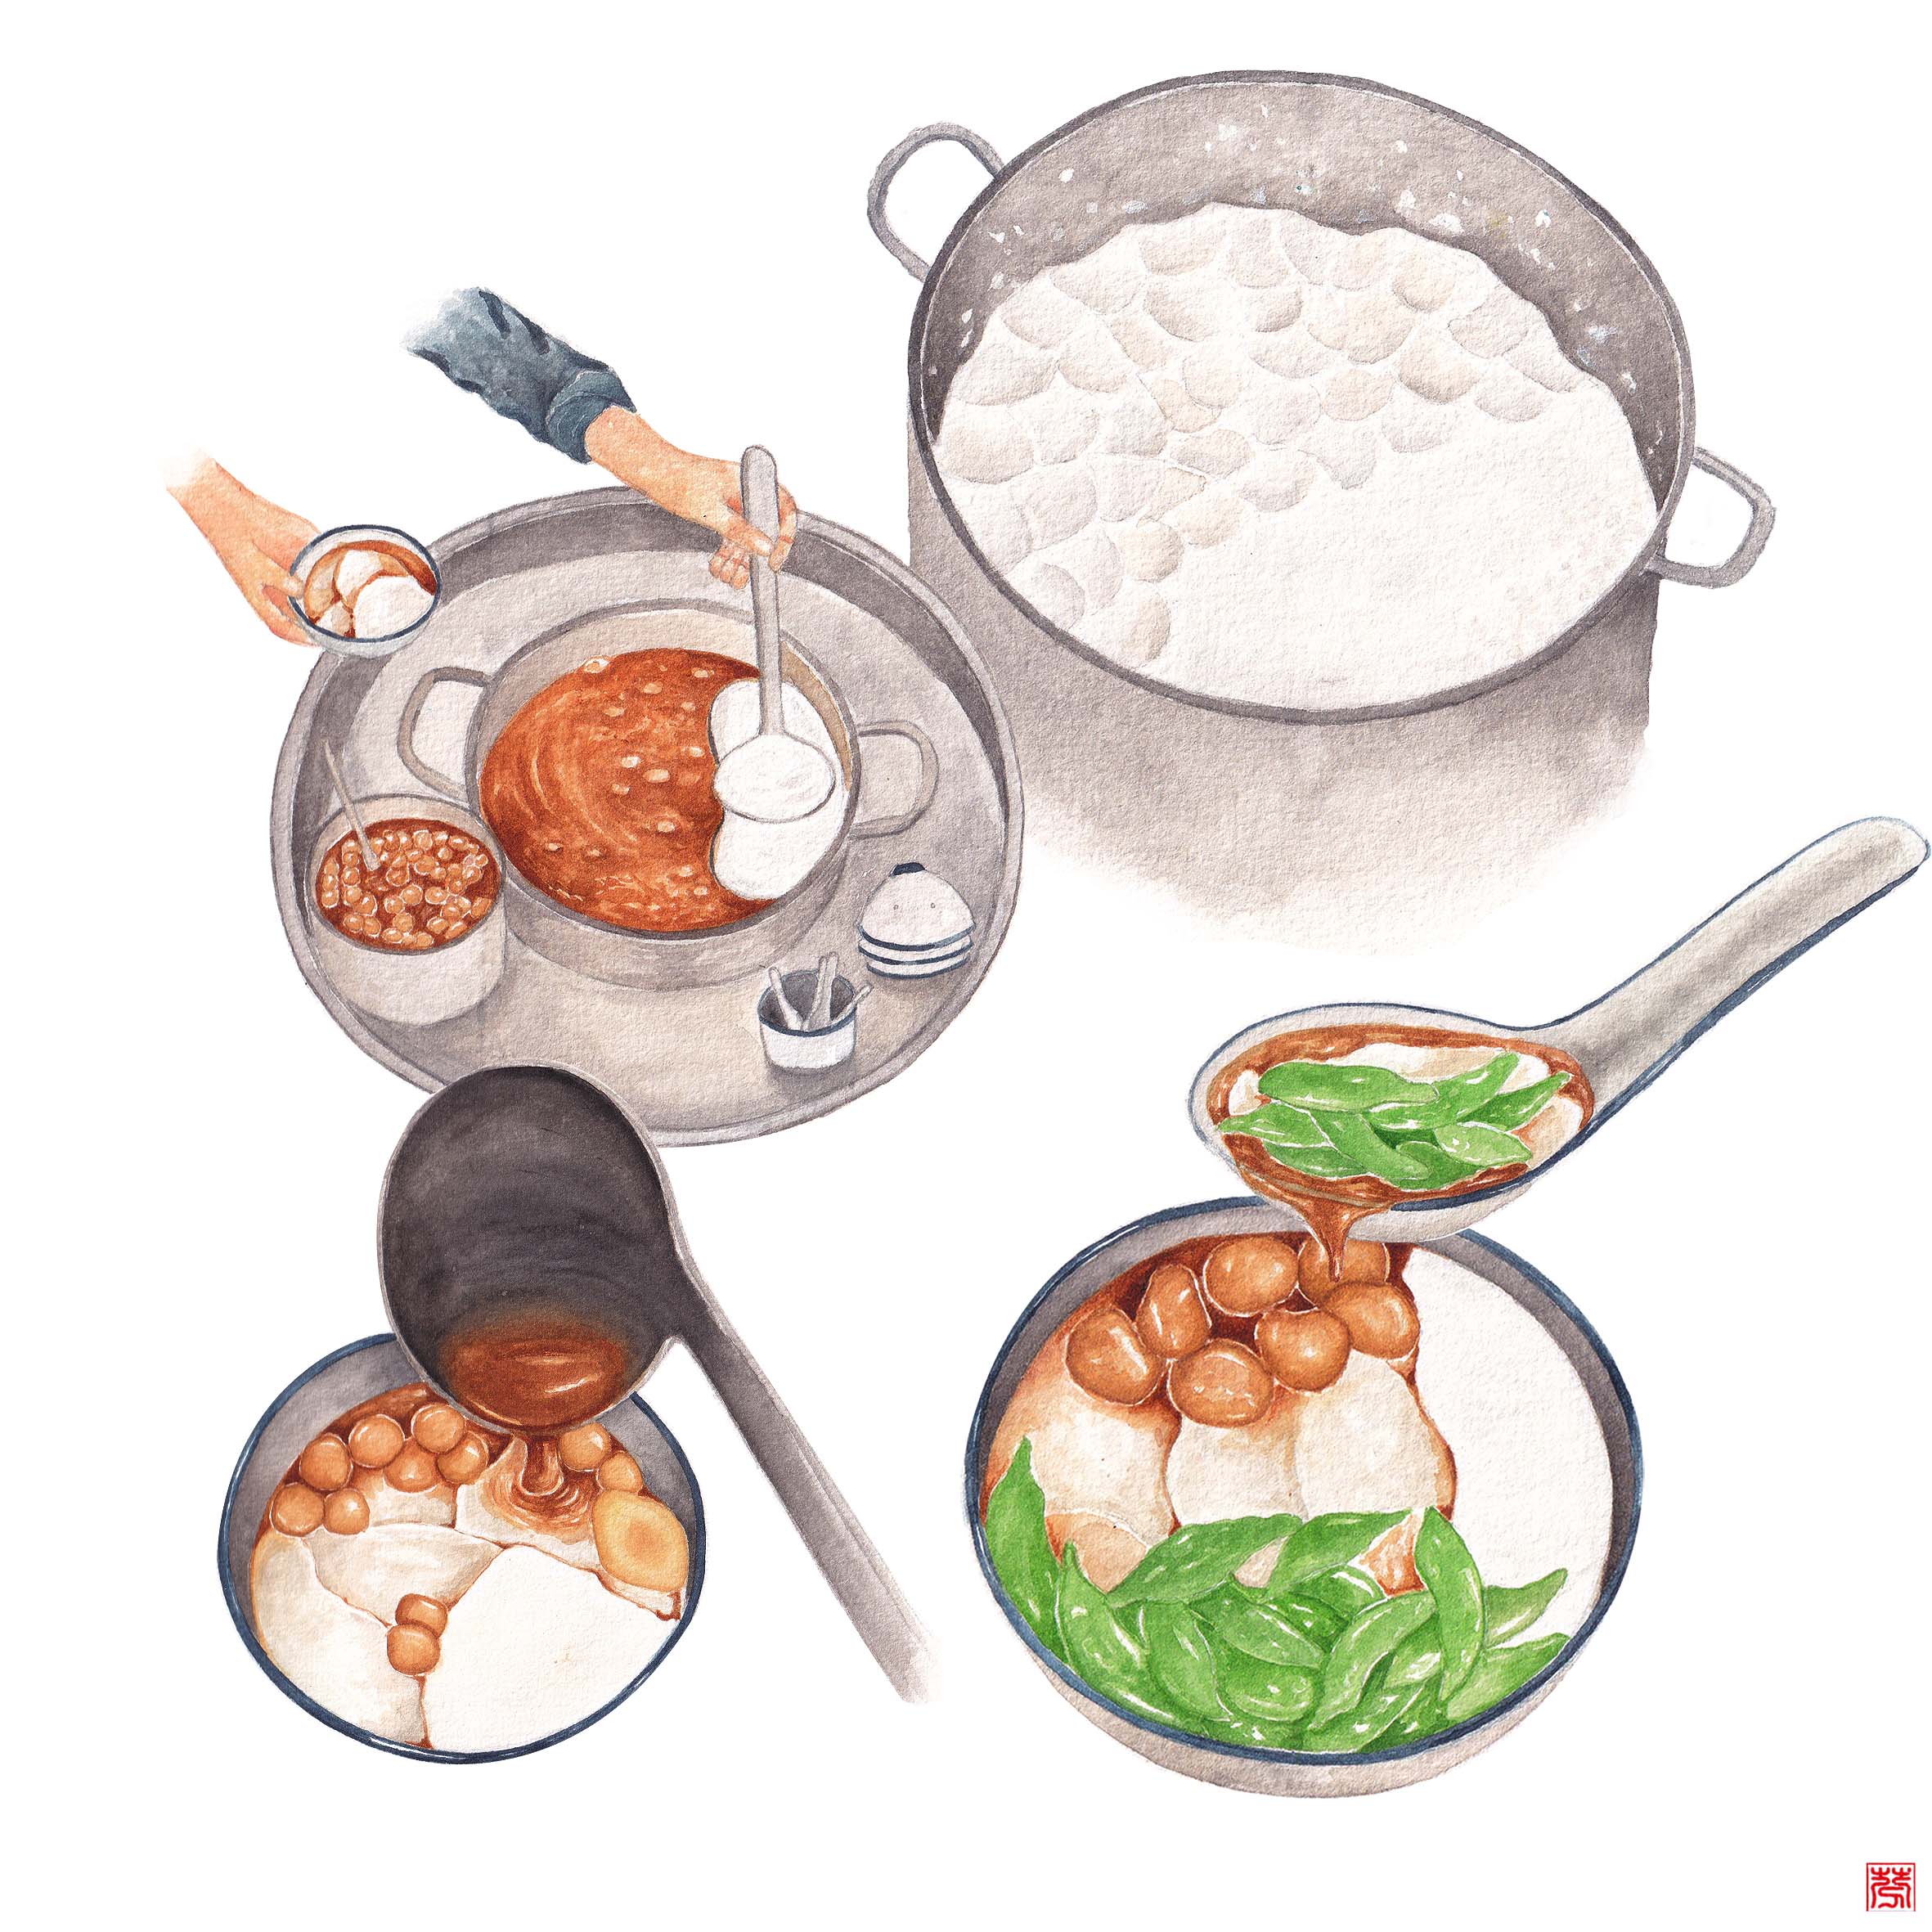 An illustration by @phanh_ phanh_0717 featuring Tau hu nuoc duong (tofu topped with sugar syrup).